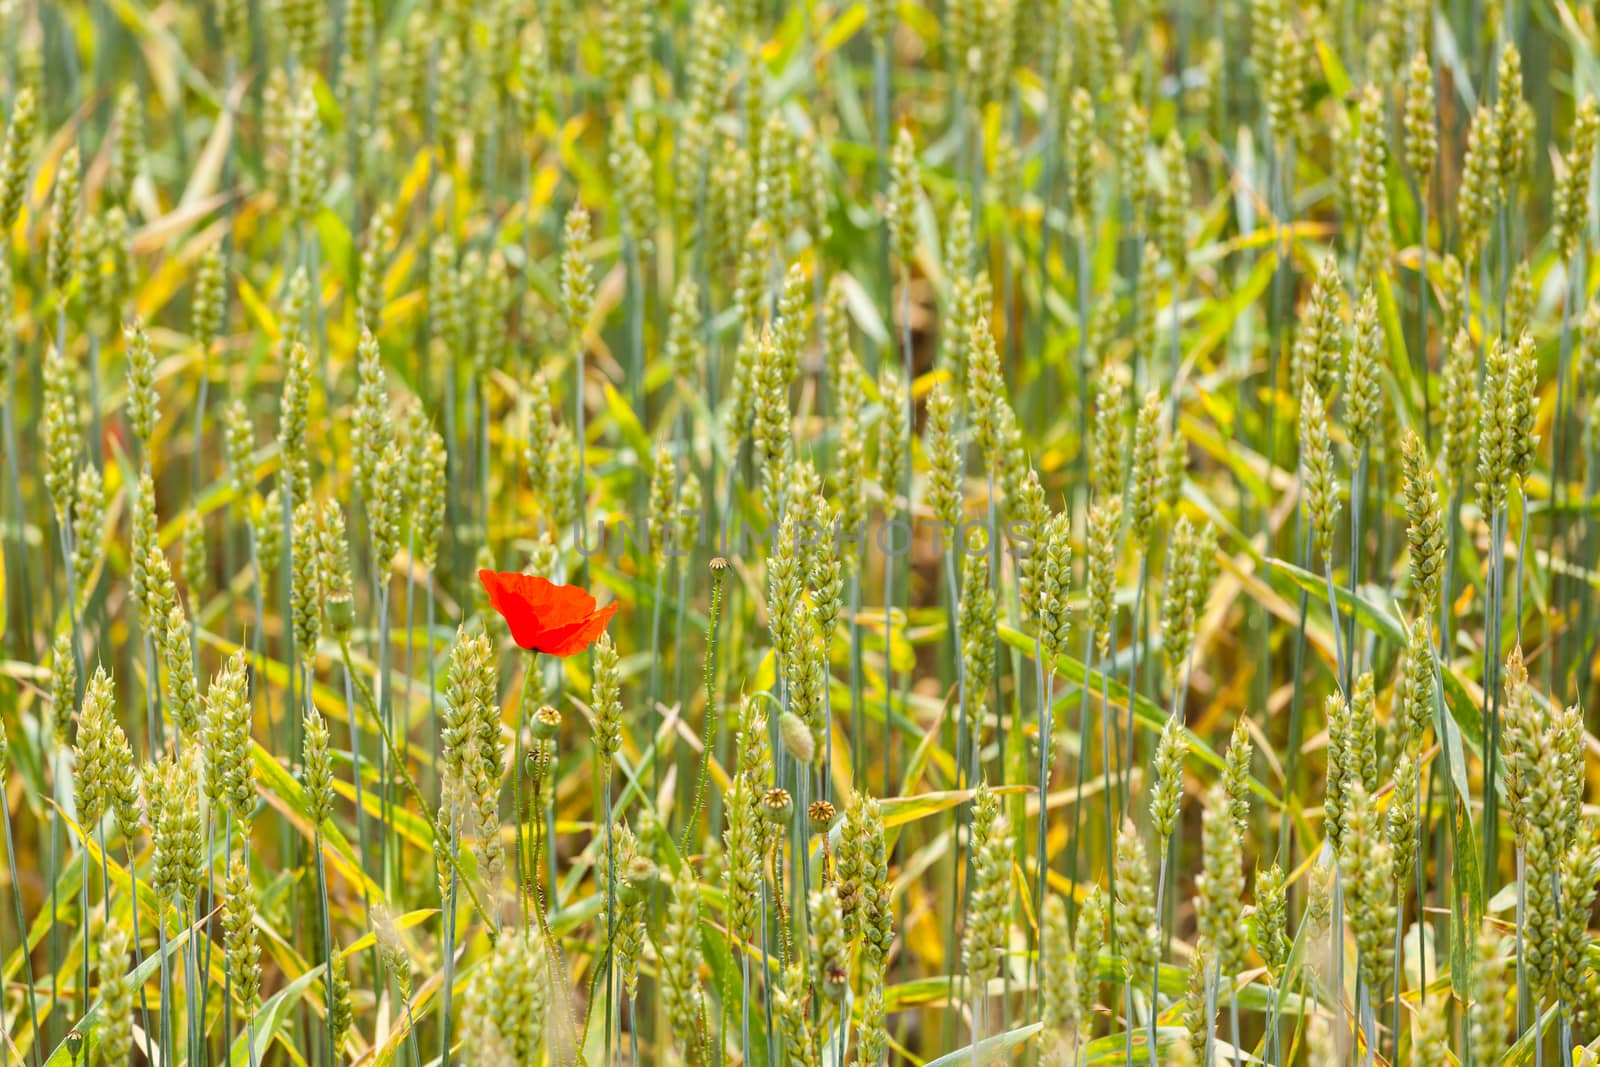 A red poppy in the middle of a wheat field